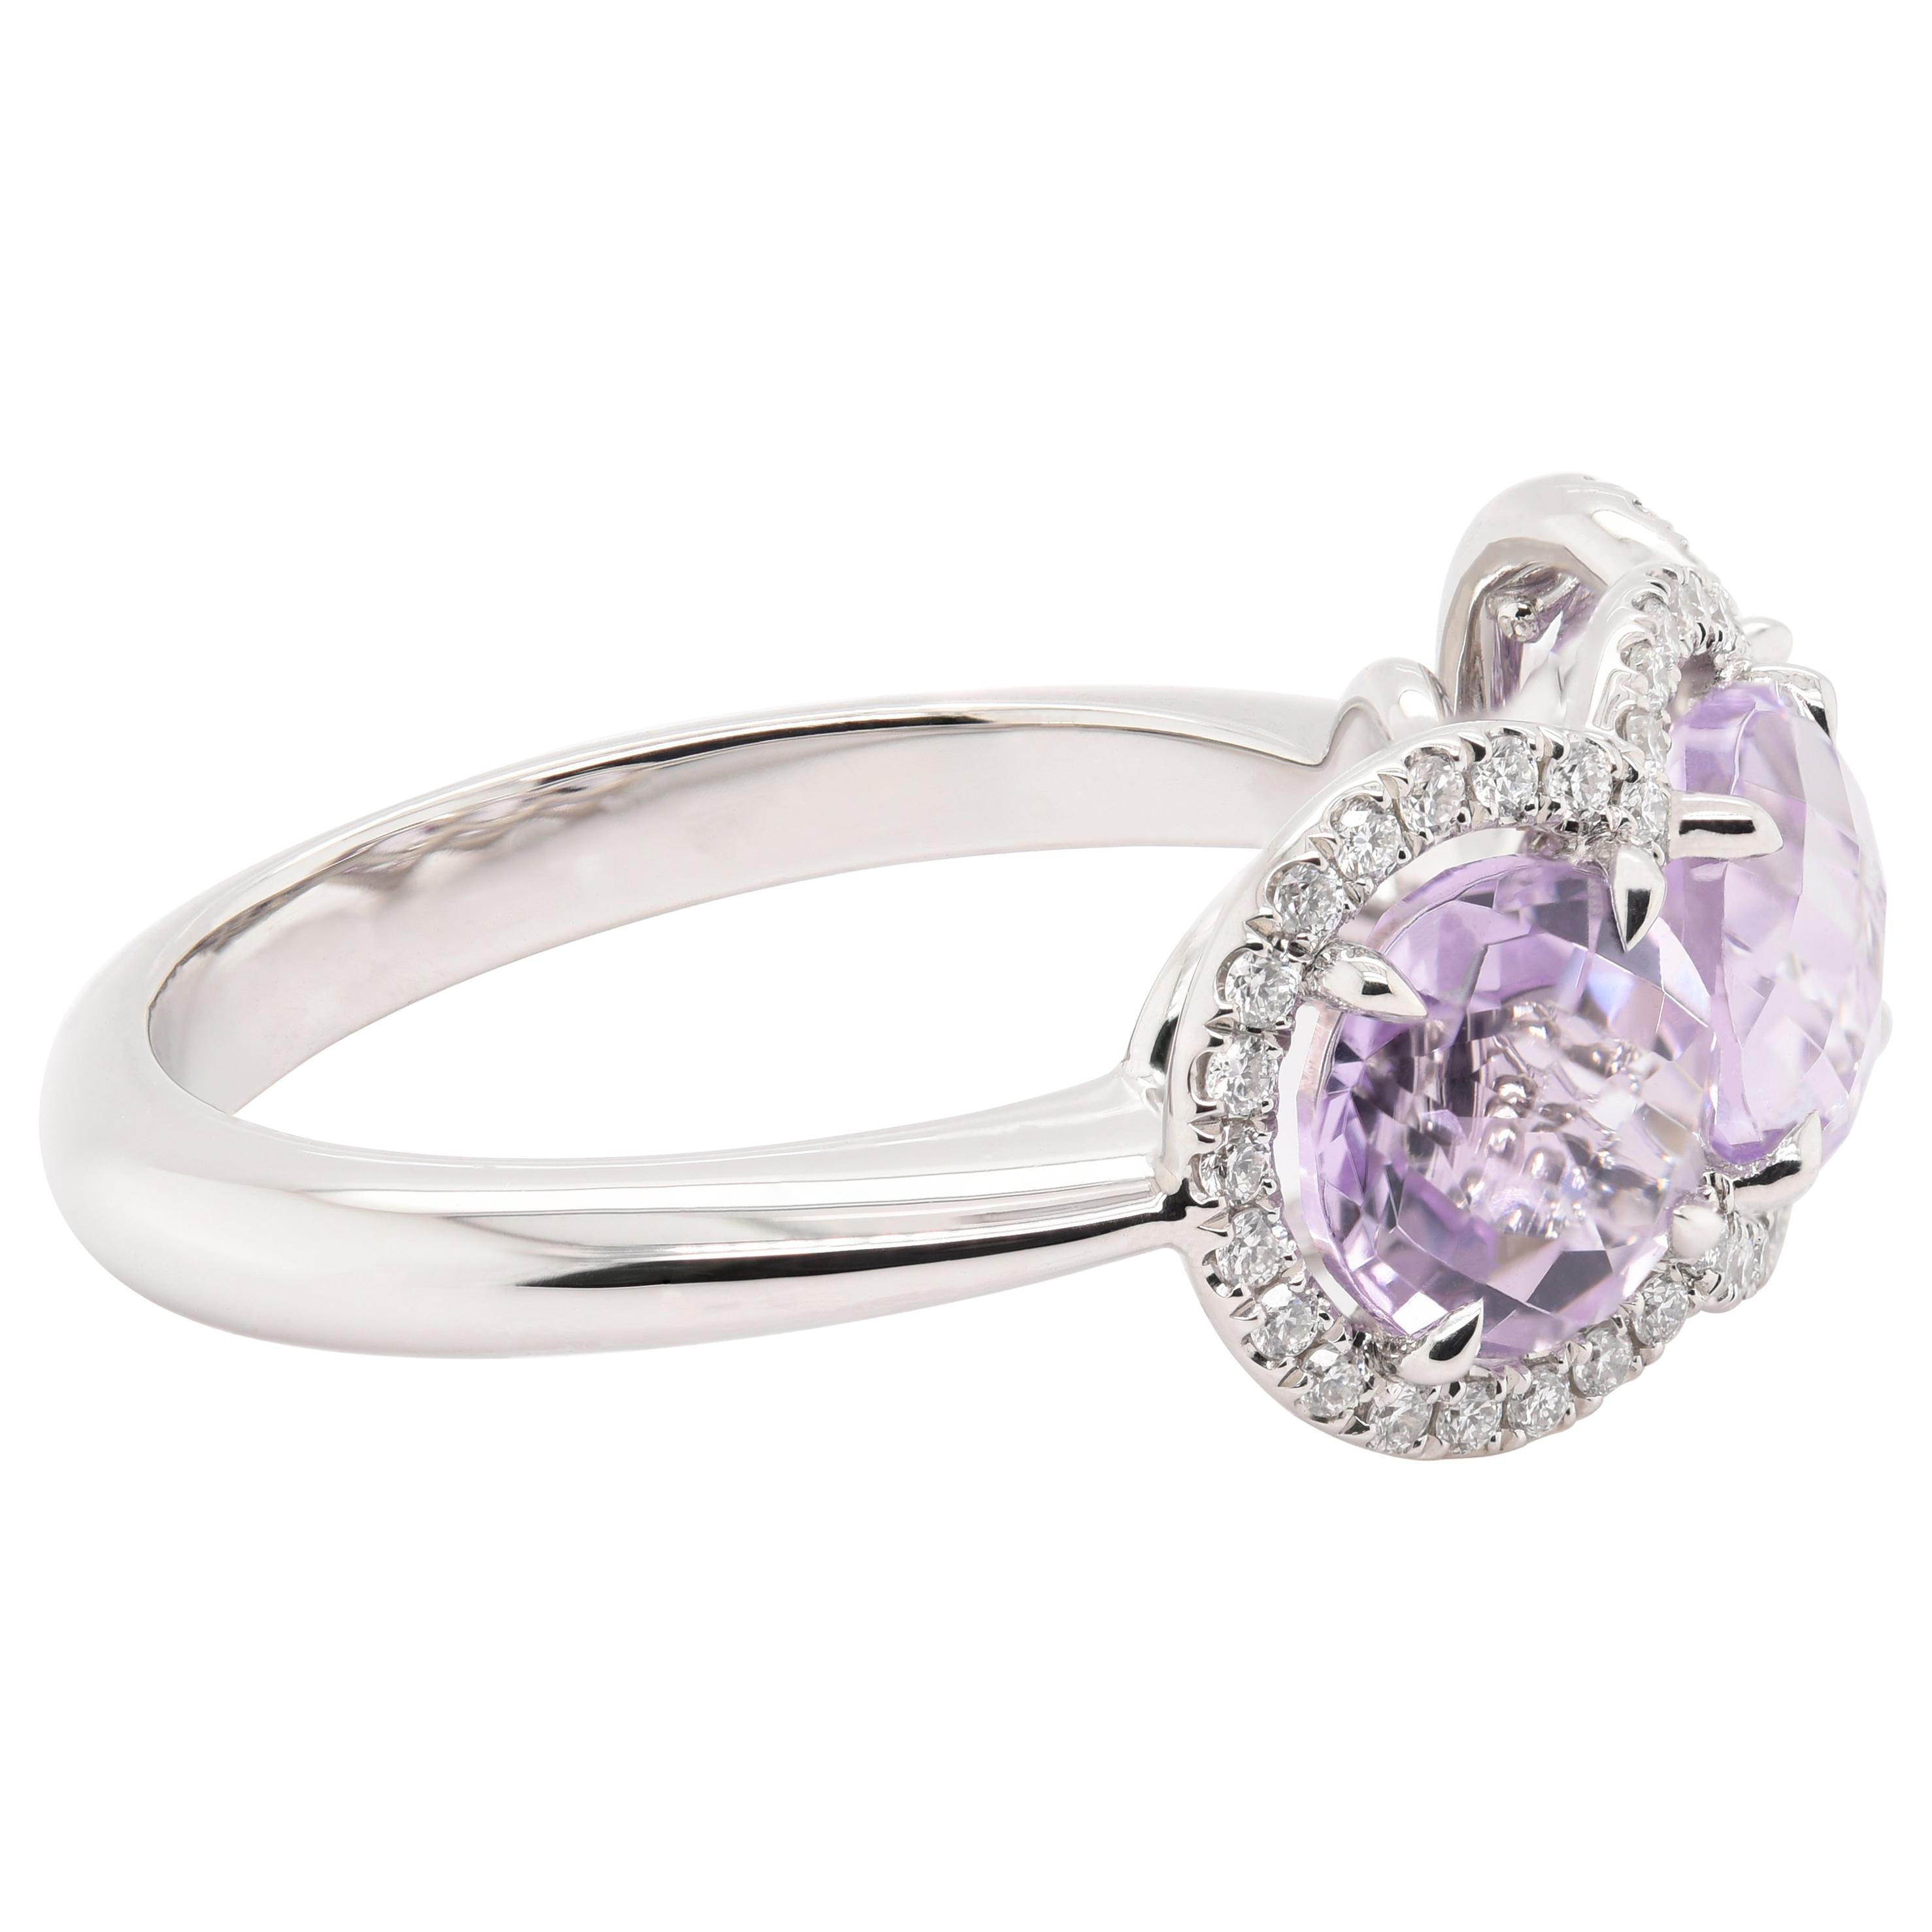 JAG New York created for you this amethyst ring surrounded by diamond halos that is comprised of 2.95 carats total gemstone weight of amethyst and diamonds set in platinum.  

Unapologetic self-expression through jewelry. JAG New York's world class